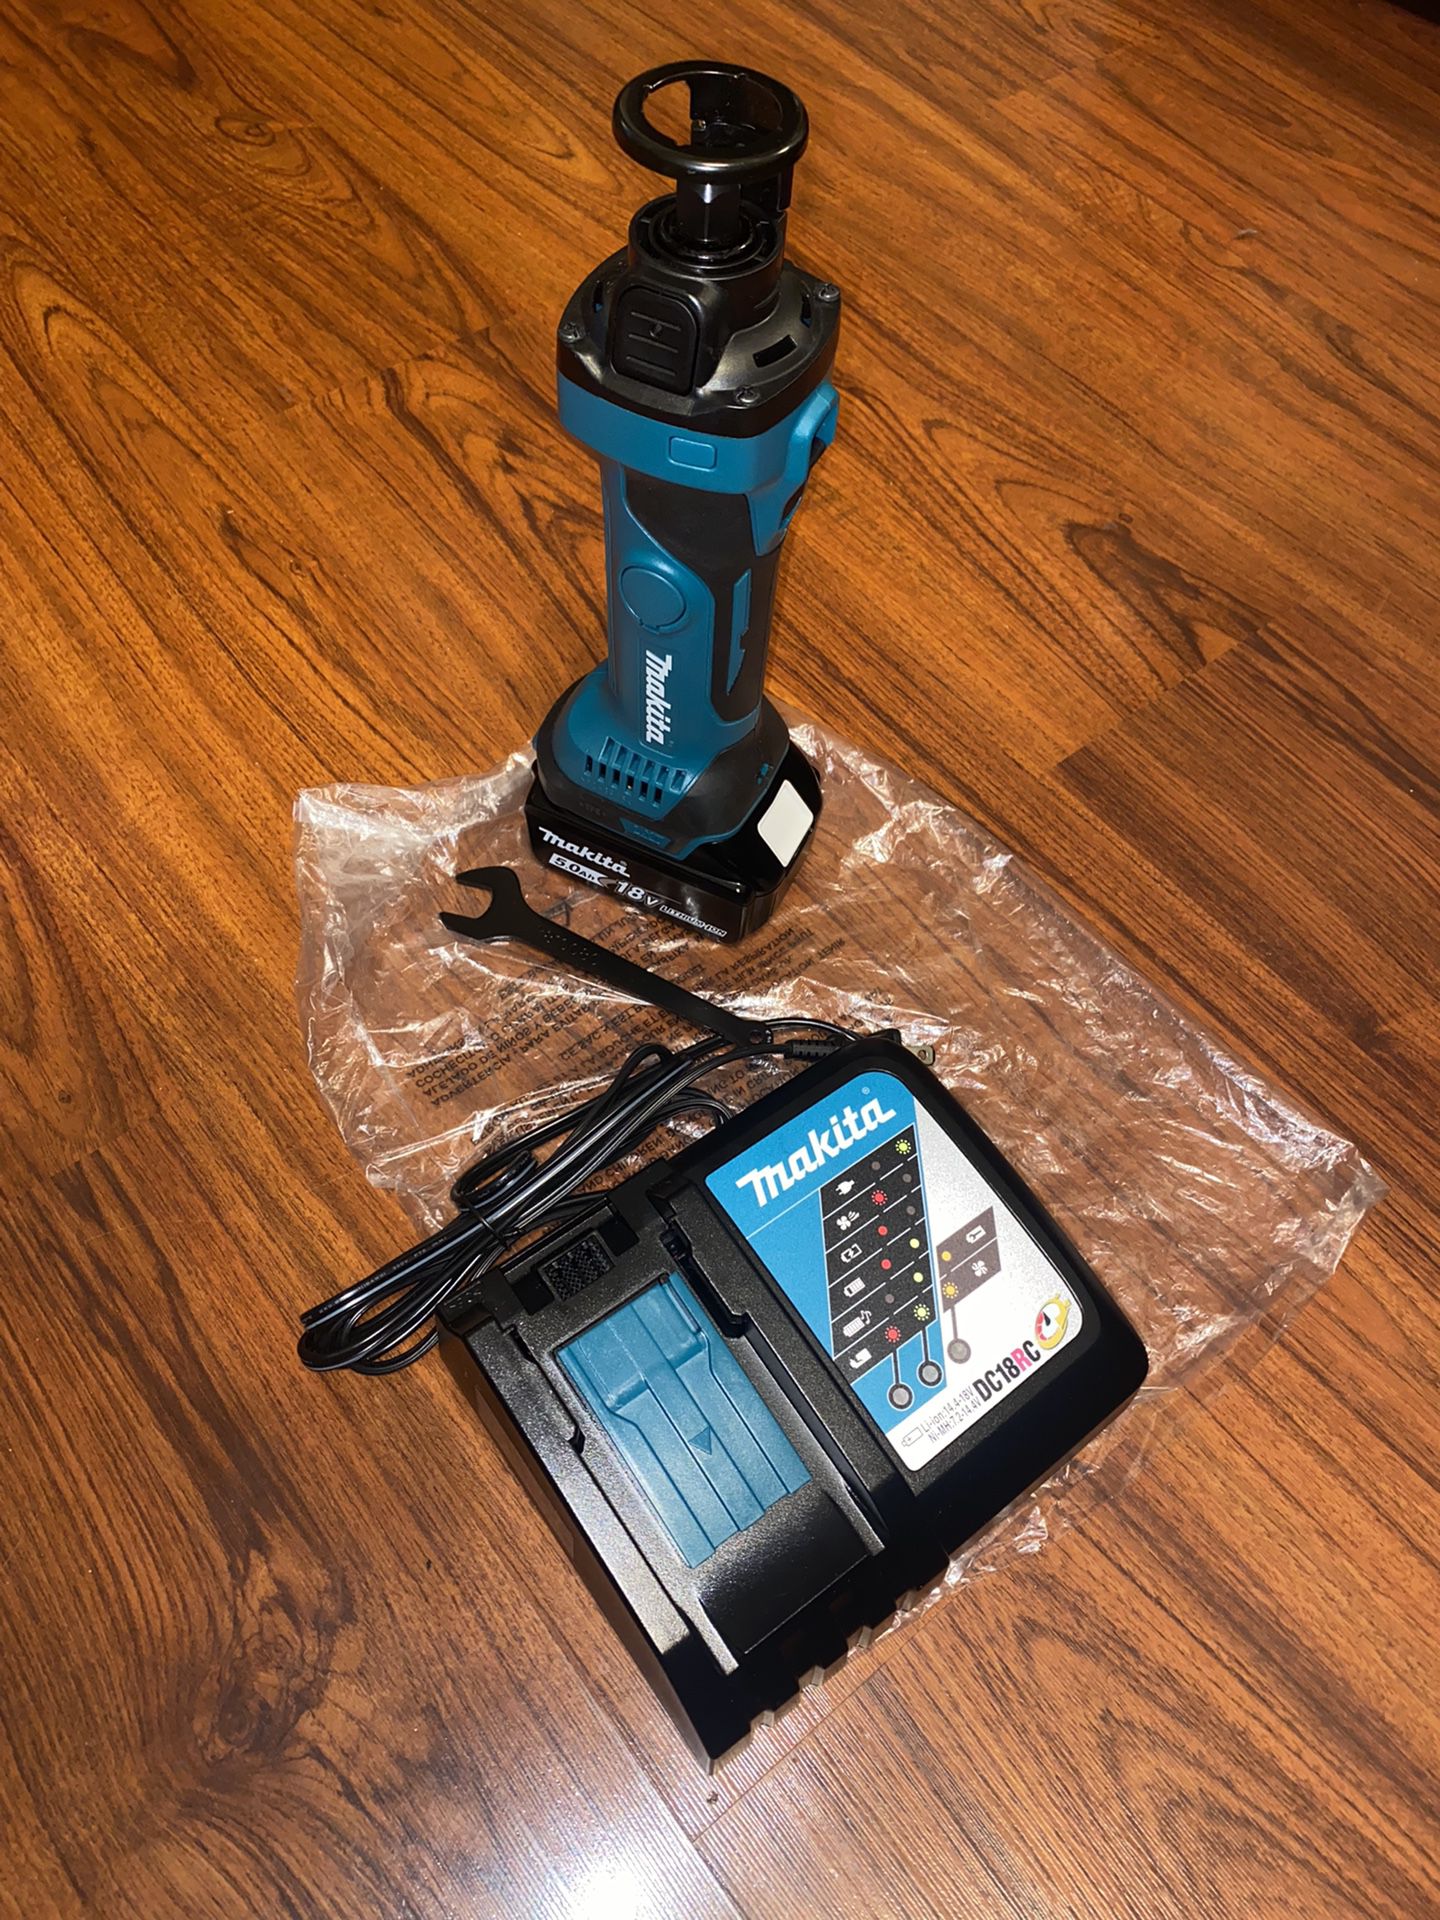 1) (1) Makita 18V Cutout Tool (XOC01) (XSF03) (1) 5.0 Ah Battery (1)  Charger for Sale in The Bronx, NY OfferUp